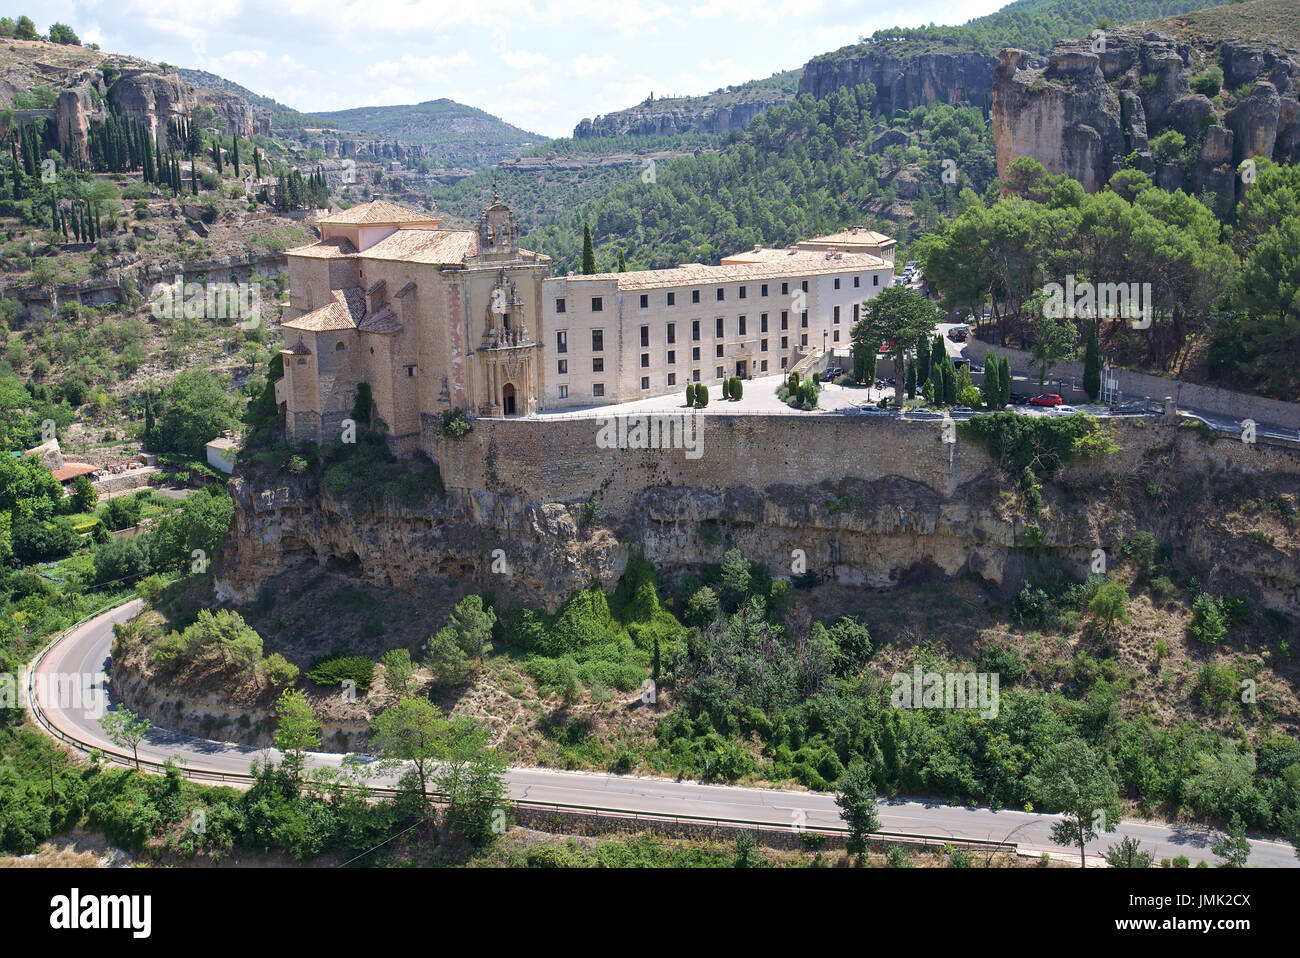 Image of 'Parador de Cuenca' in Castilla La Mancha, Spain. View from Santa Maria cathedral, a monastery from XVI century, next to 'Hanging Houses' Stock Photo